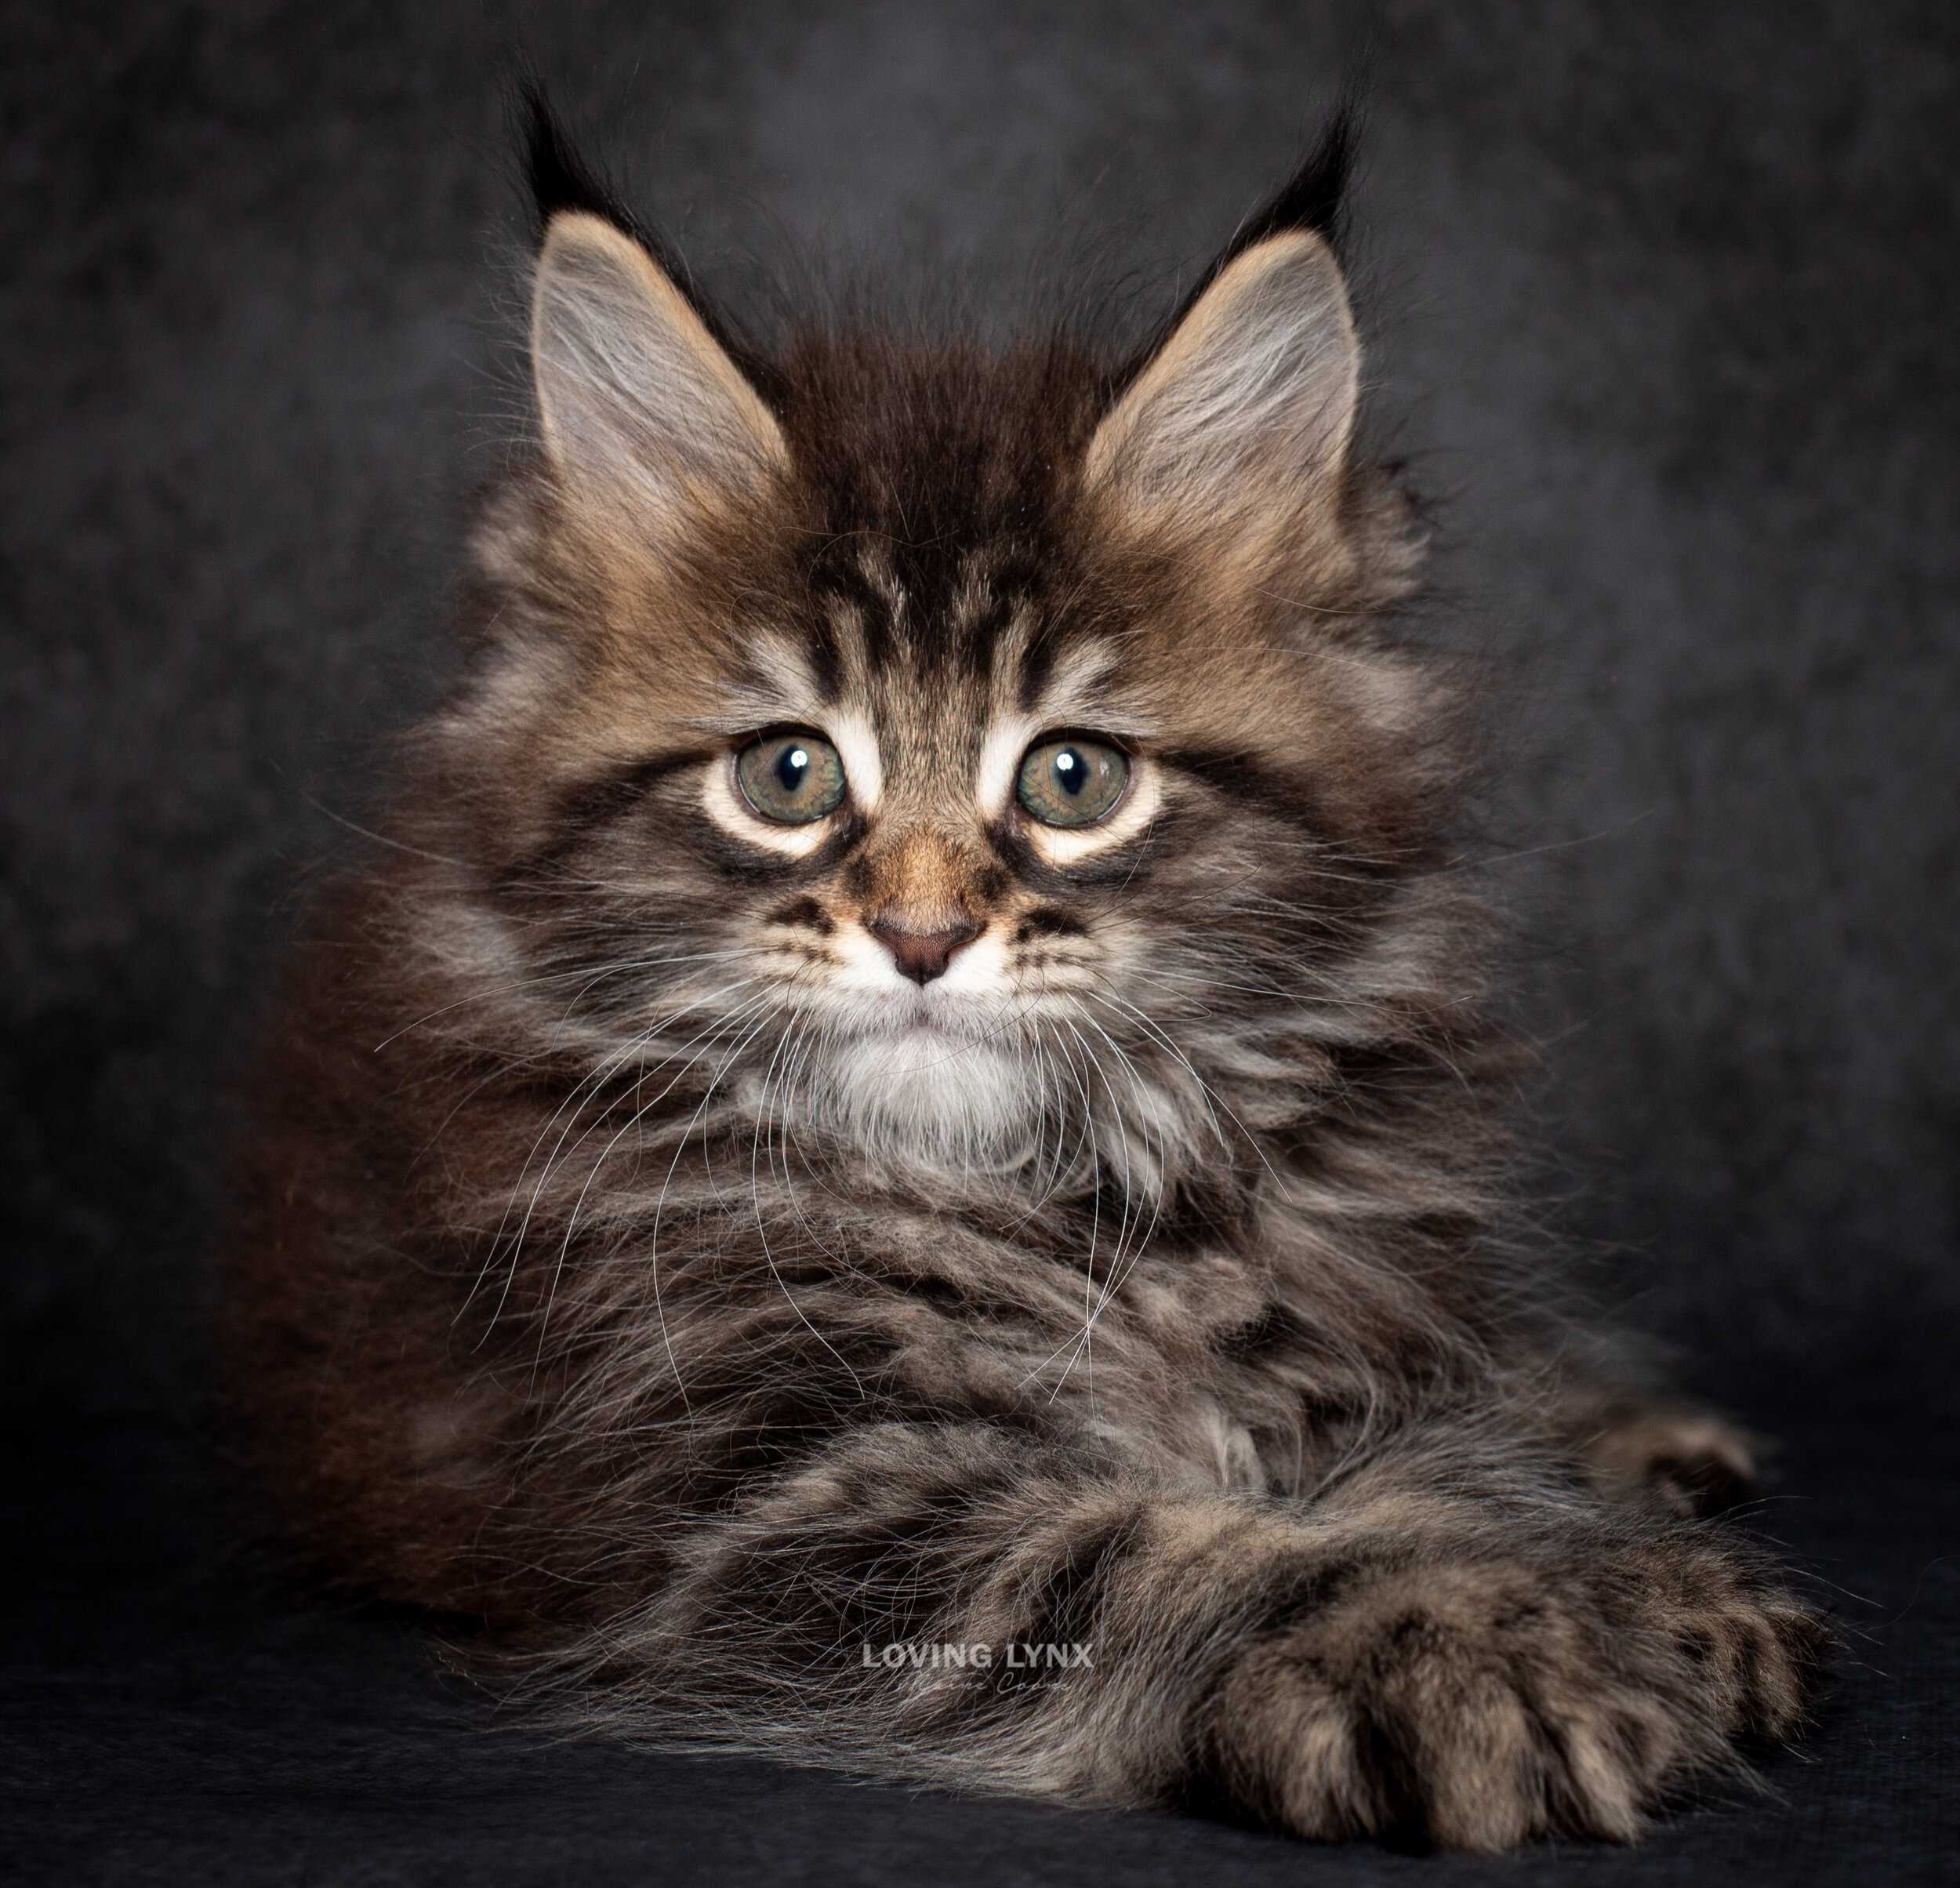 Sale for maine kittens coon Maine coon